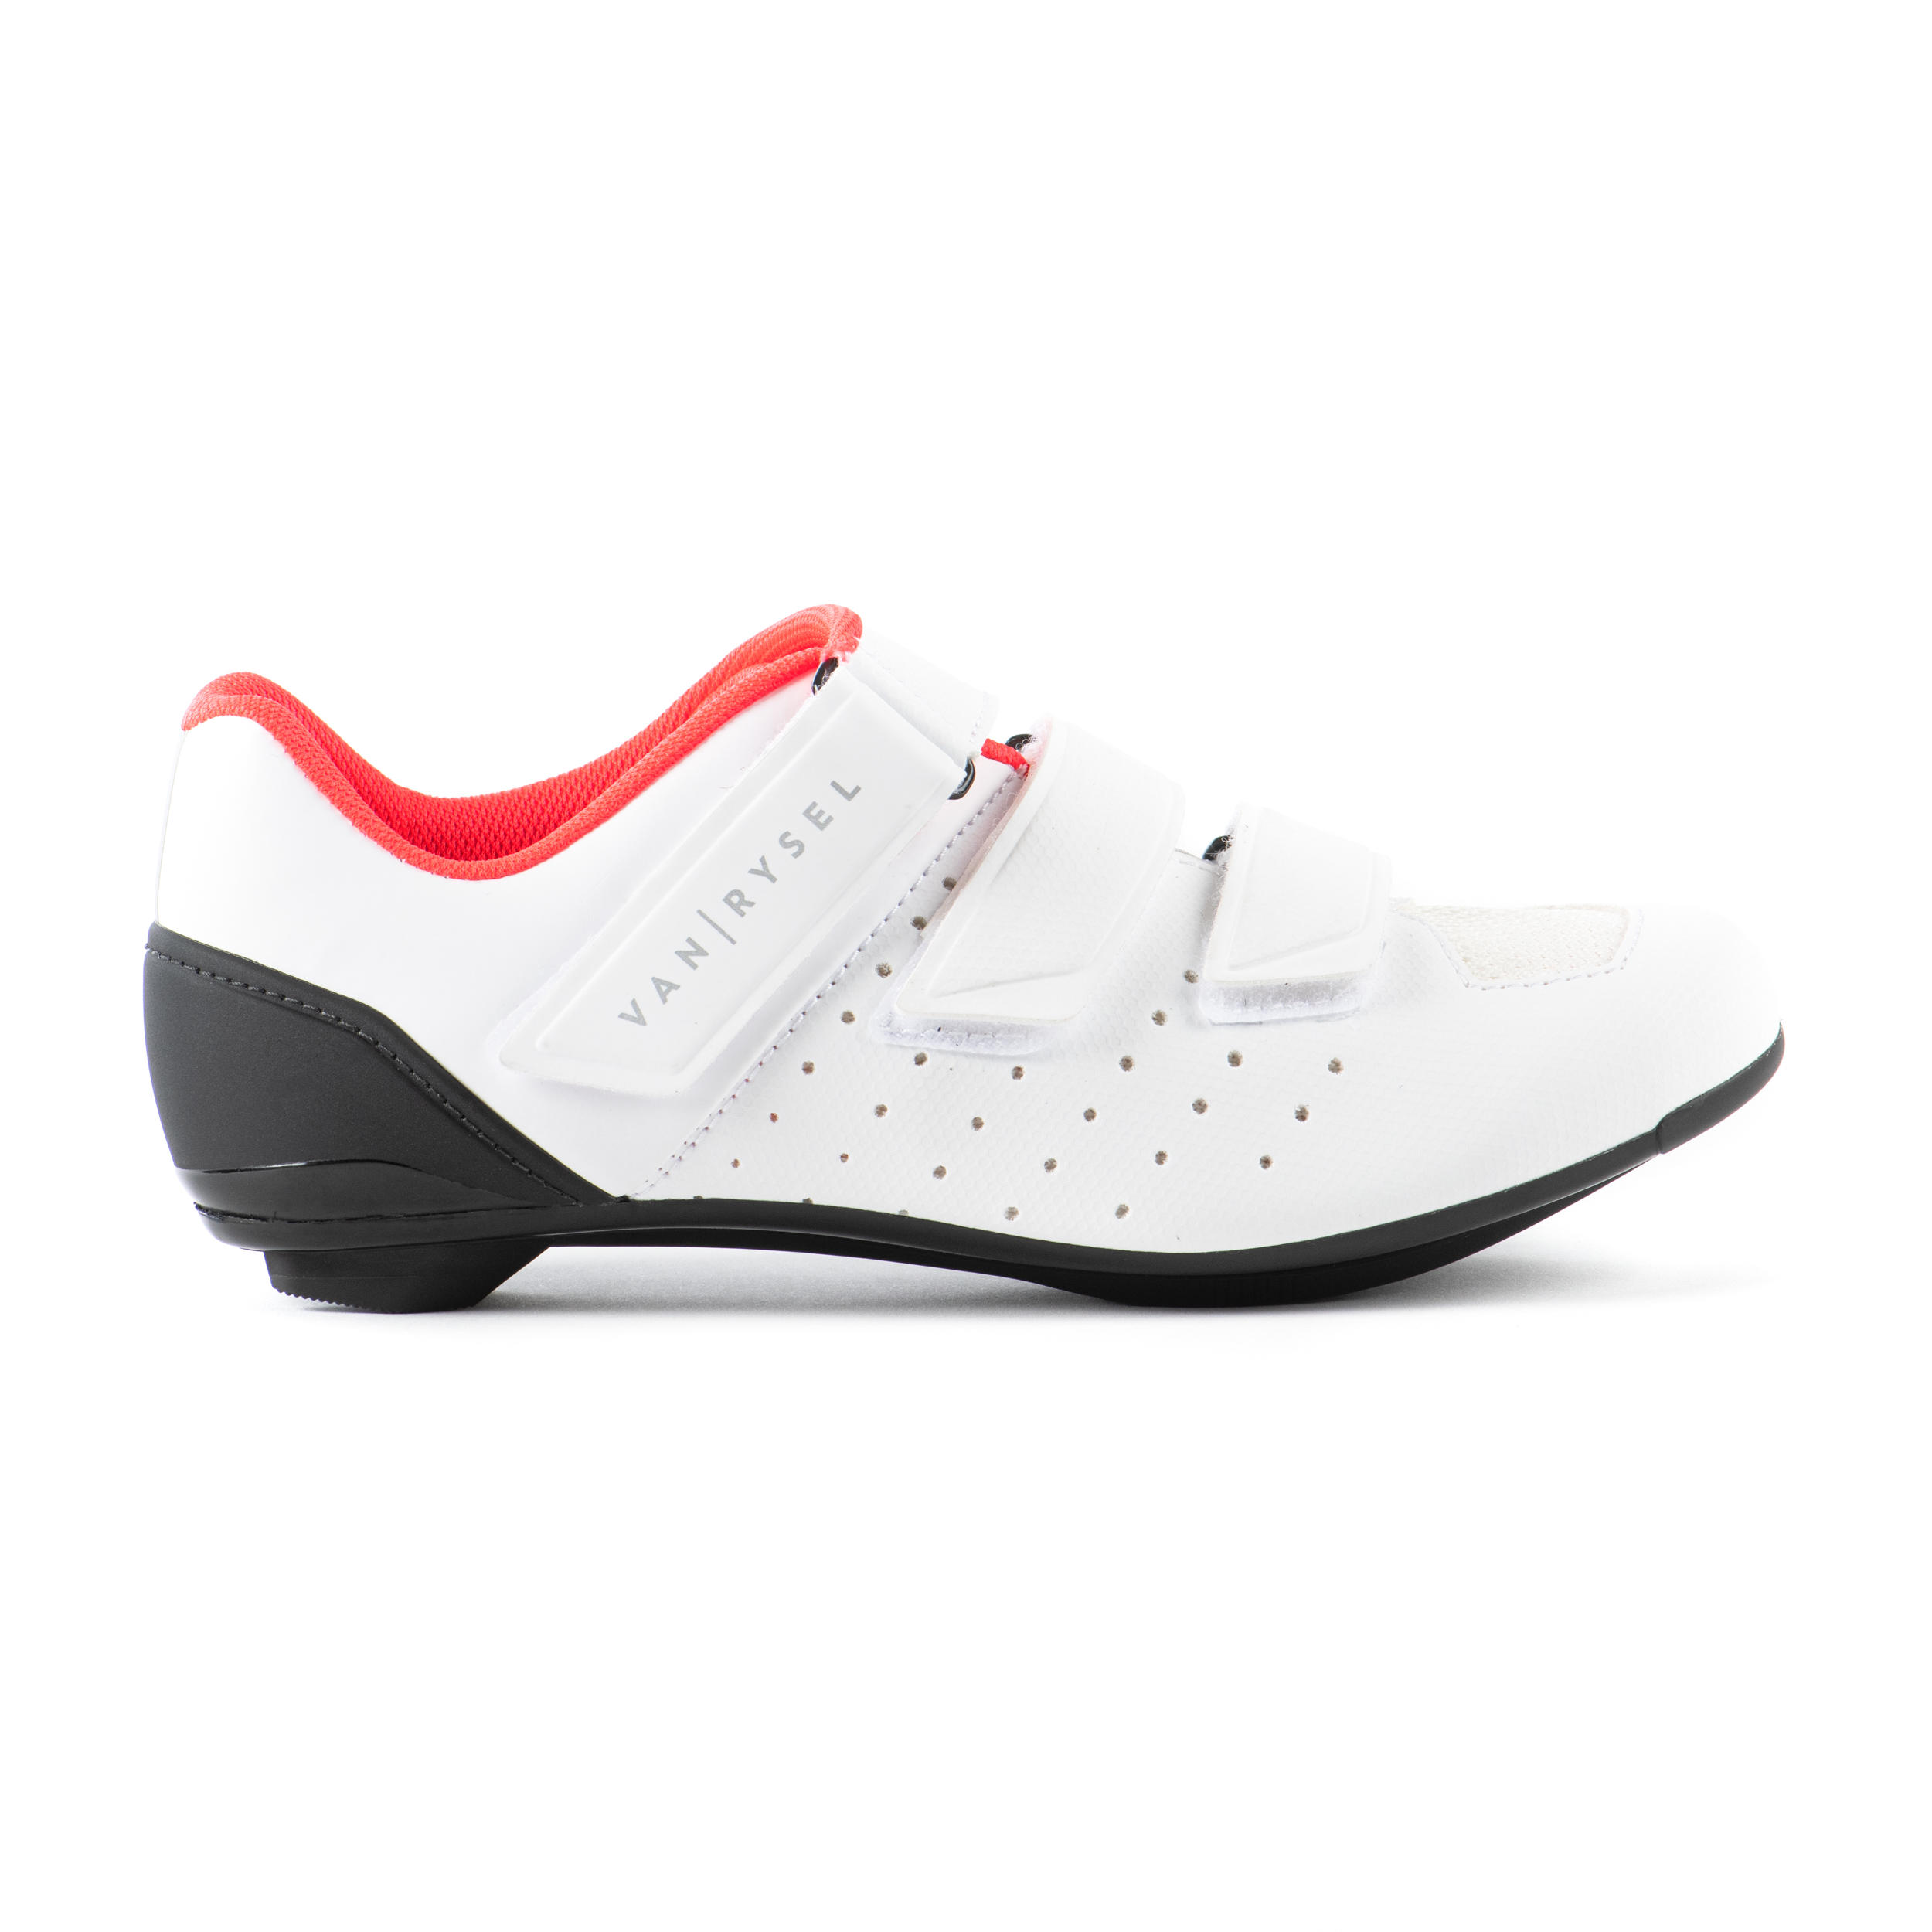 decathlon cycling shoes review